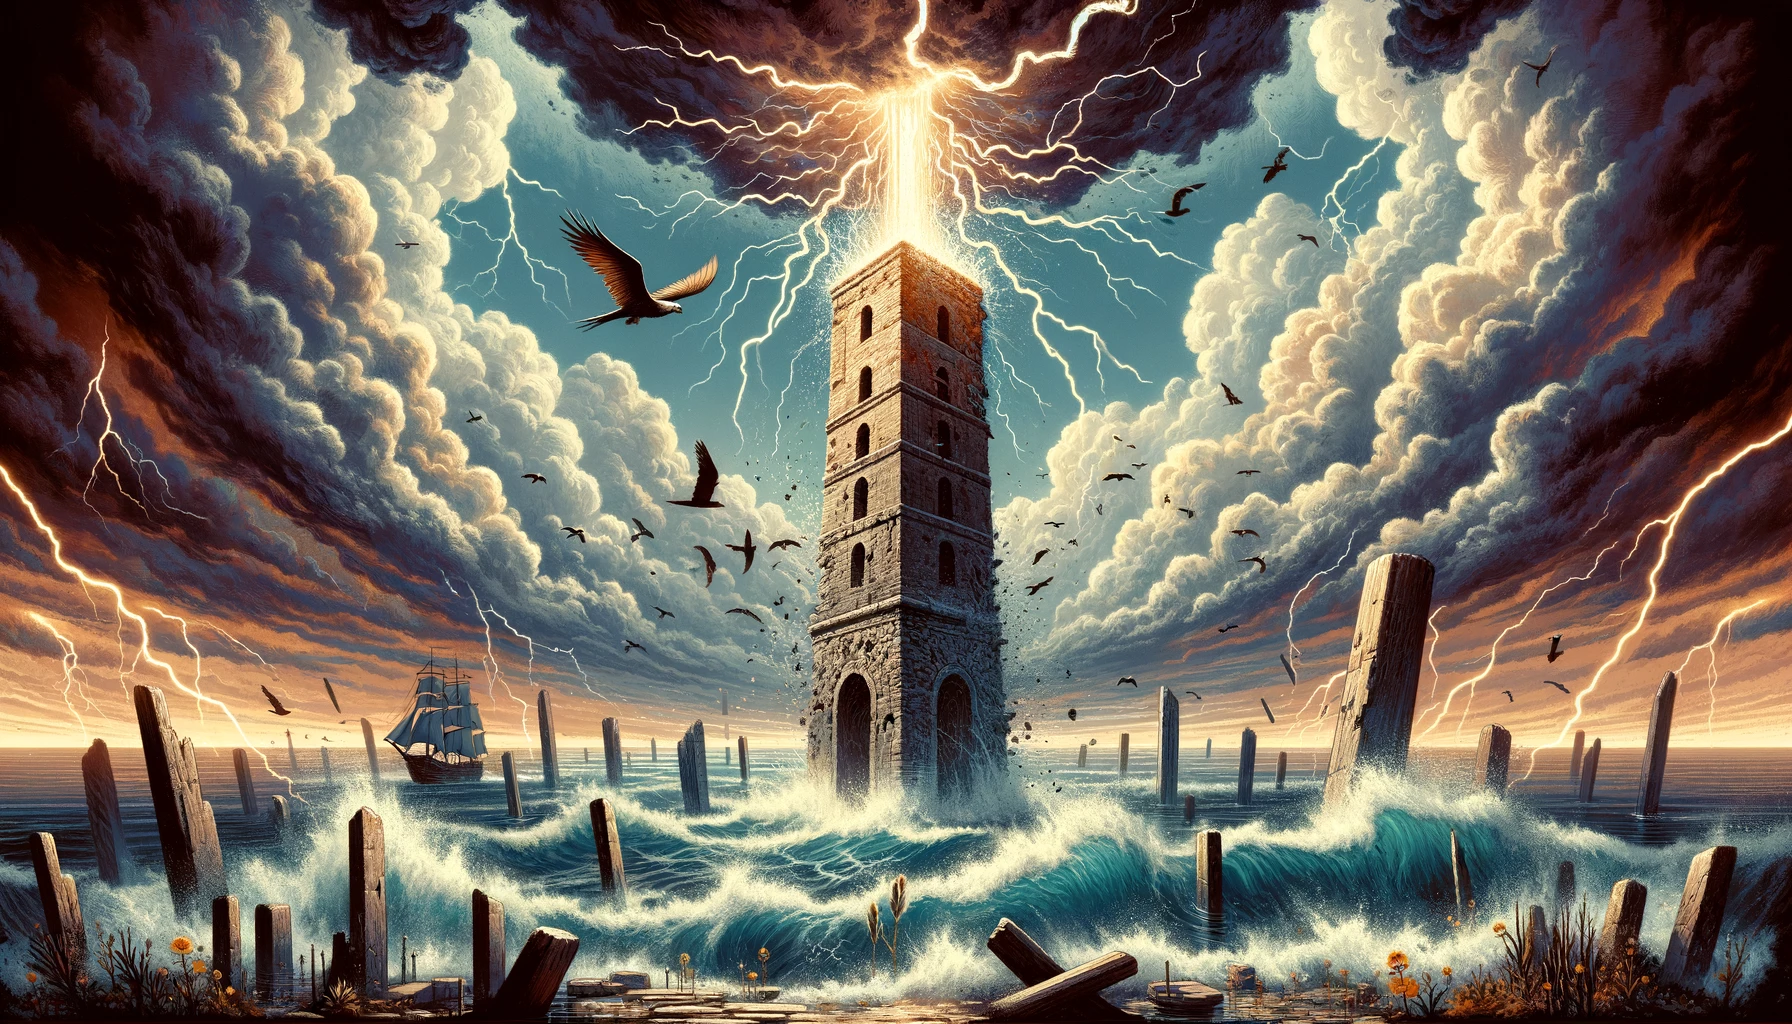 "An image depicting a tower struck by lightning, symbolizing moments of shock, revelation, and the potential for emotional growth and freedom after confronting harsh realities. It sets a transformative and cathartic tone for your article discussing 'The Tower' Tarot card as an exploration of feelings."